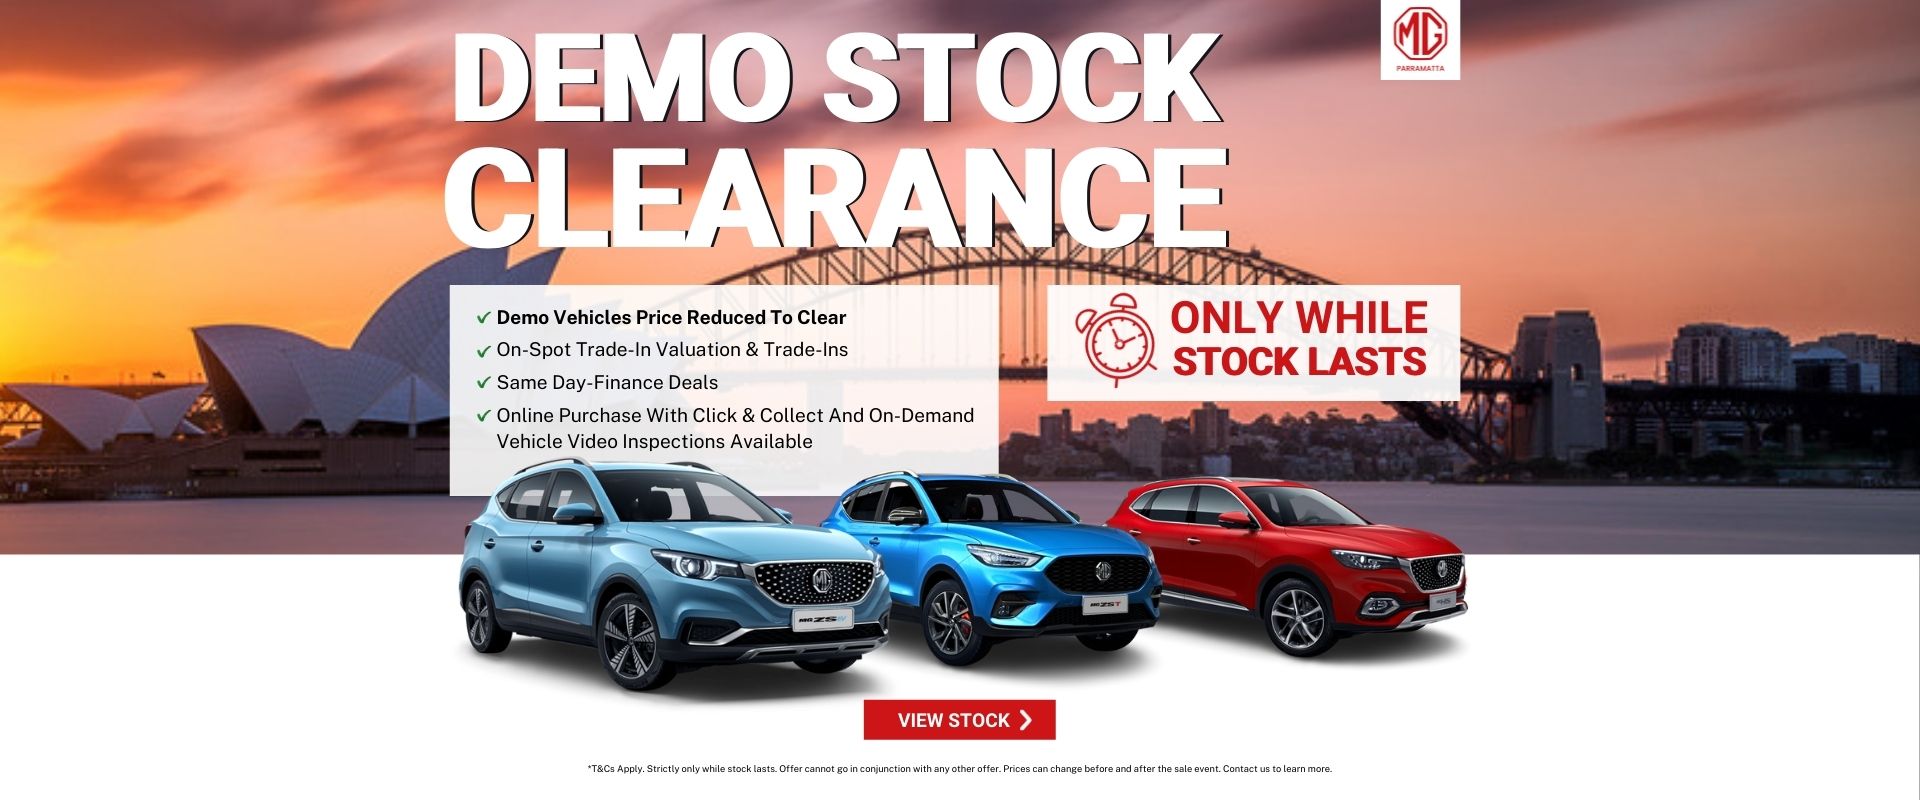 MG Parramatta is offering attractive prices on demo and used MG 3, MG HS and MG ZS to clear the stock. 